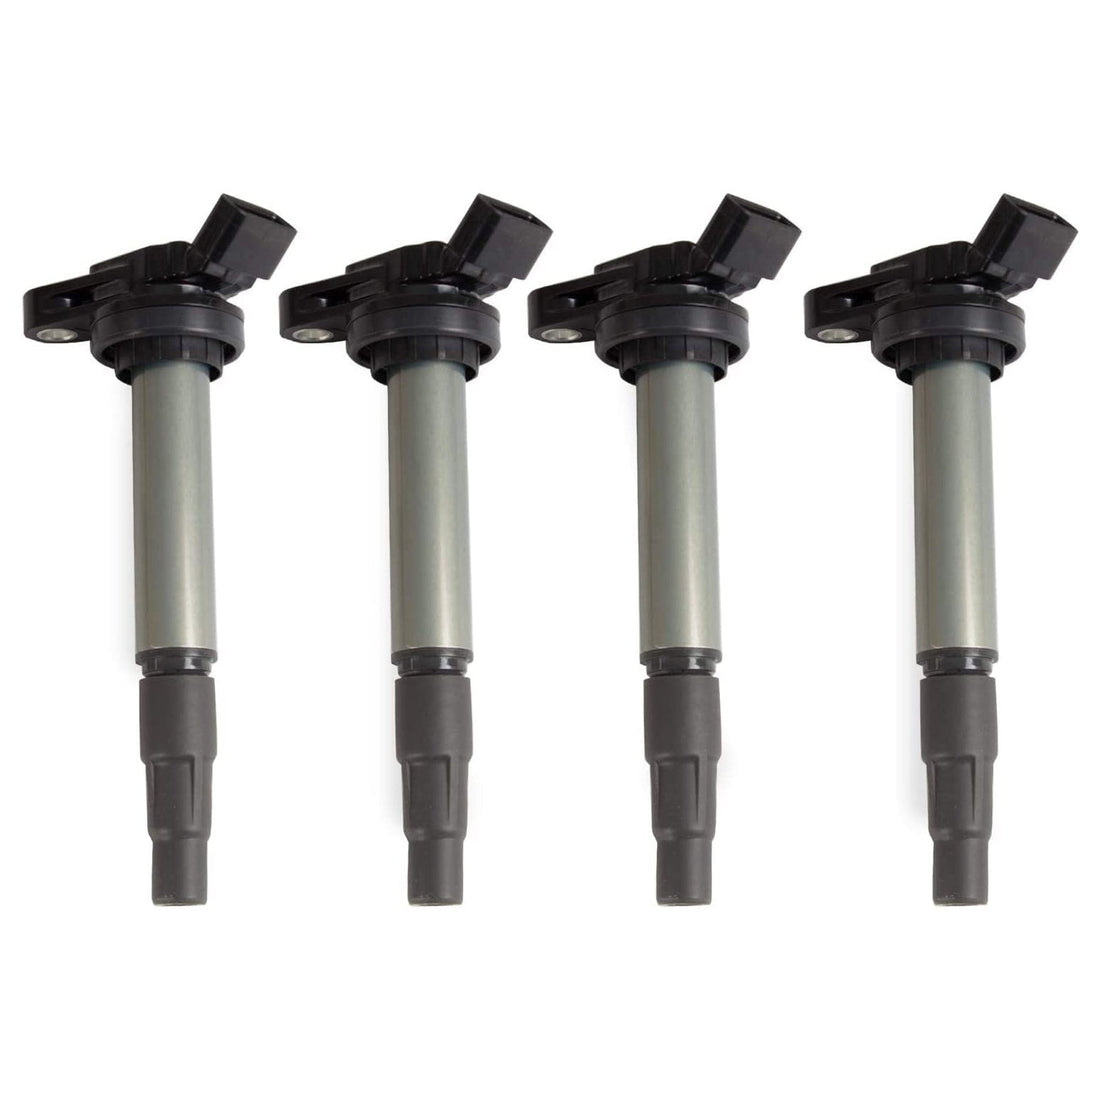 4-Pack Ignition Coil for 09-19 1.8L Corolla, Matrix, Prius, Vibe